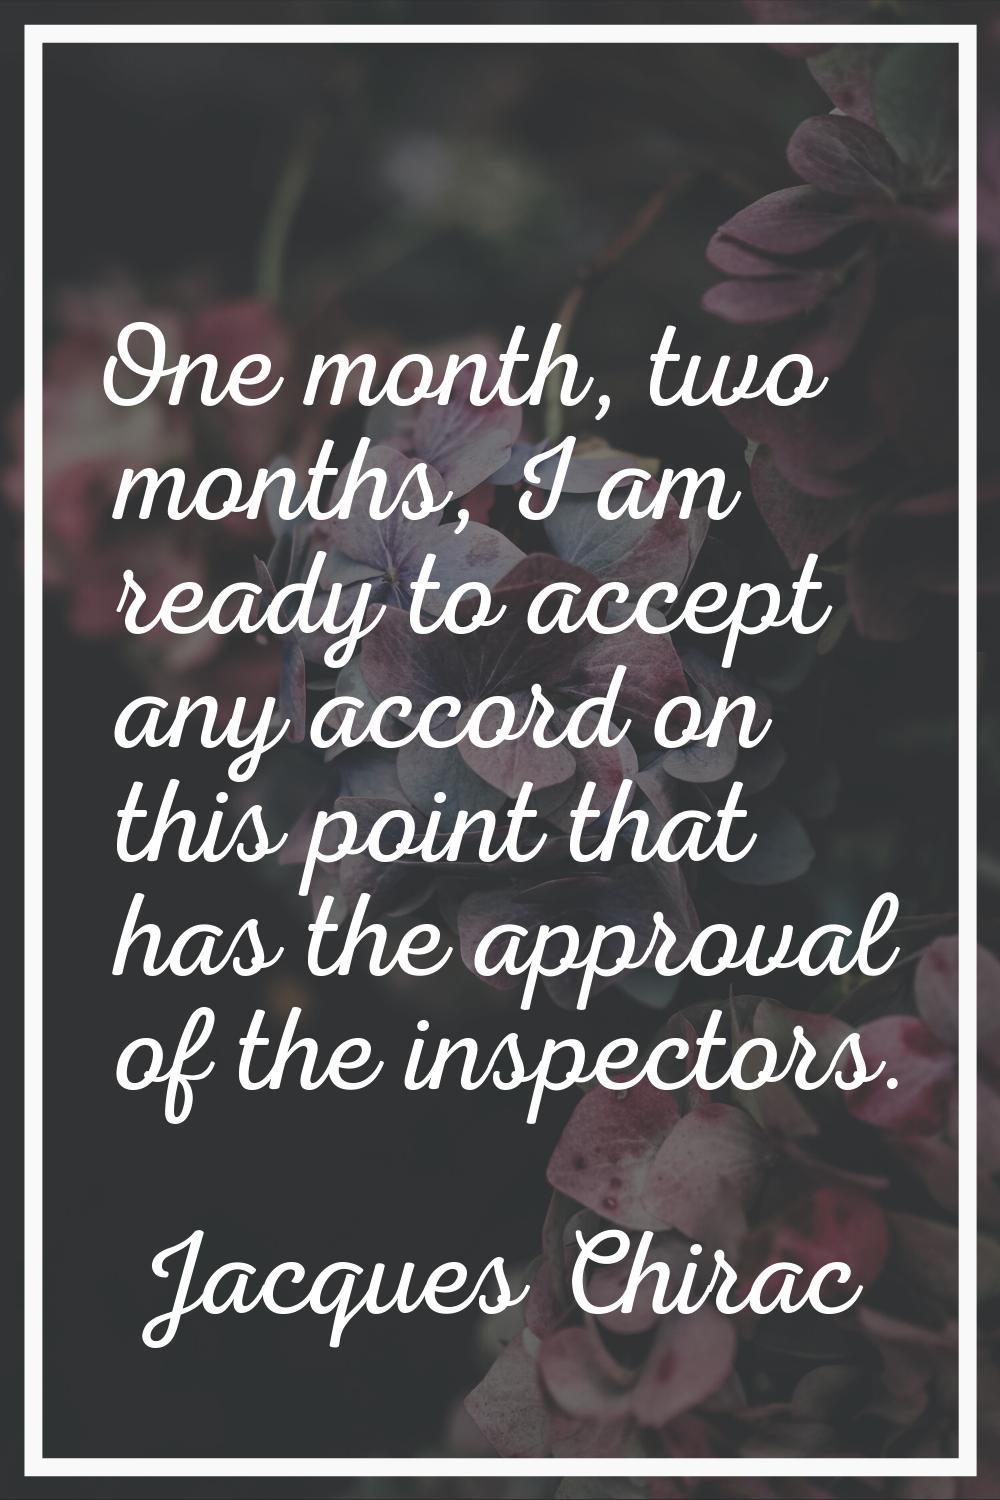 One month, two months, I am ready to accept any accord on this point that has the approval of the i